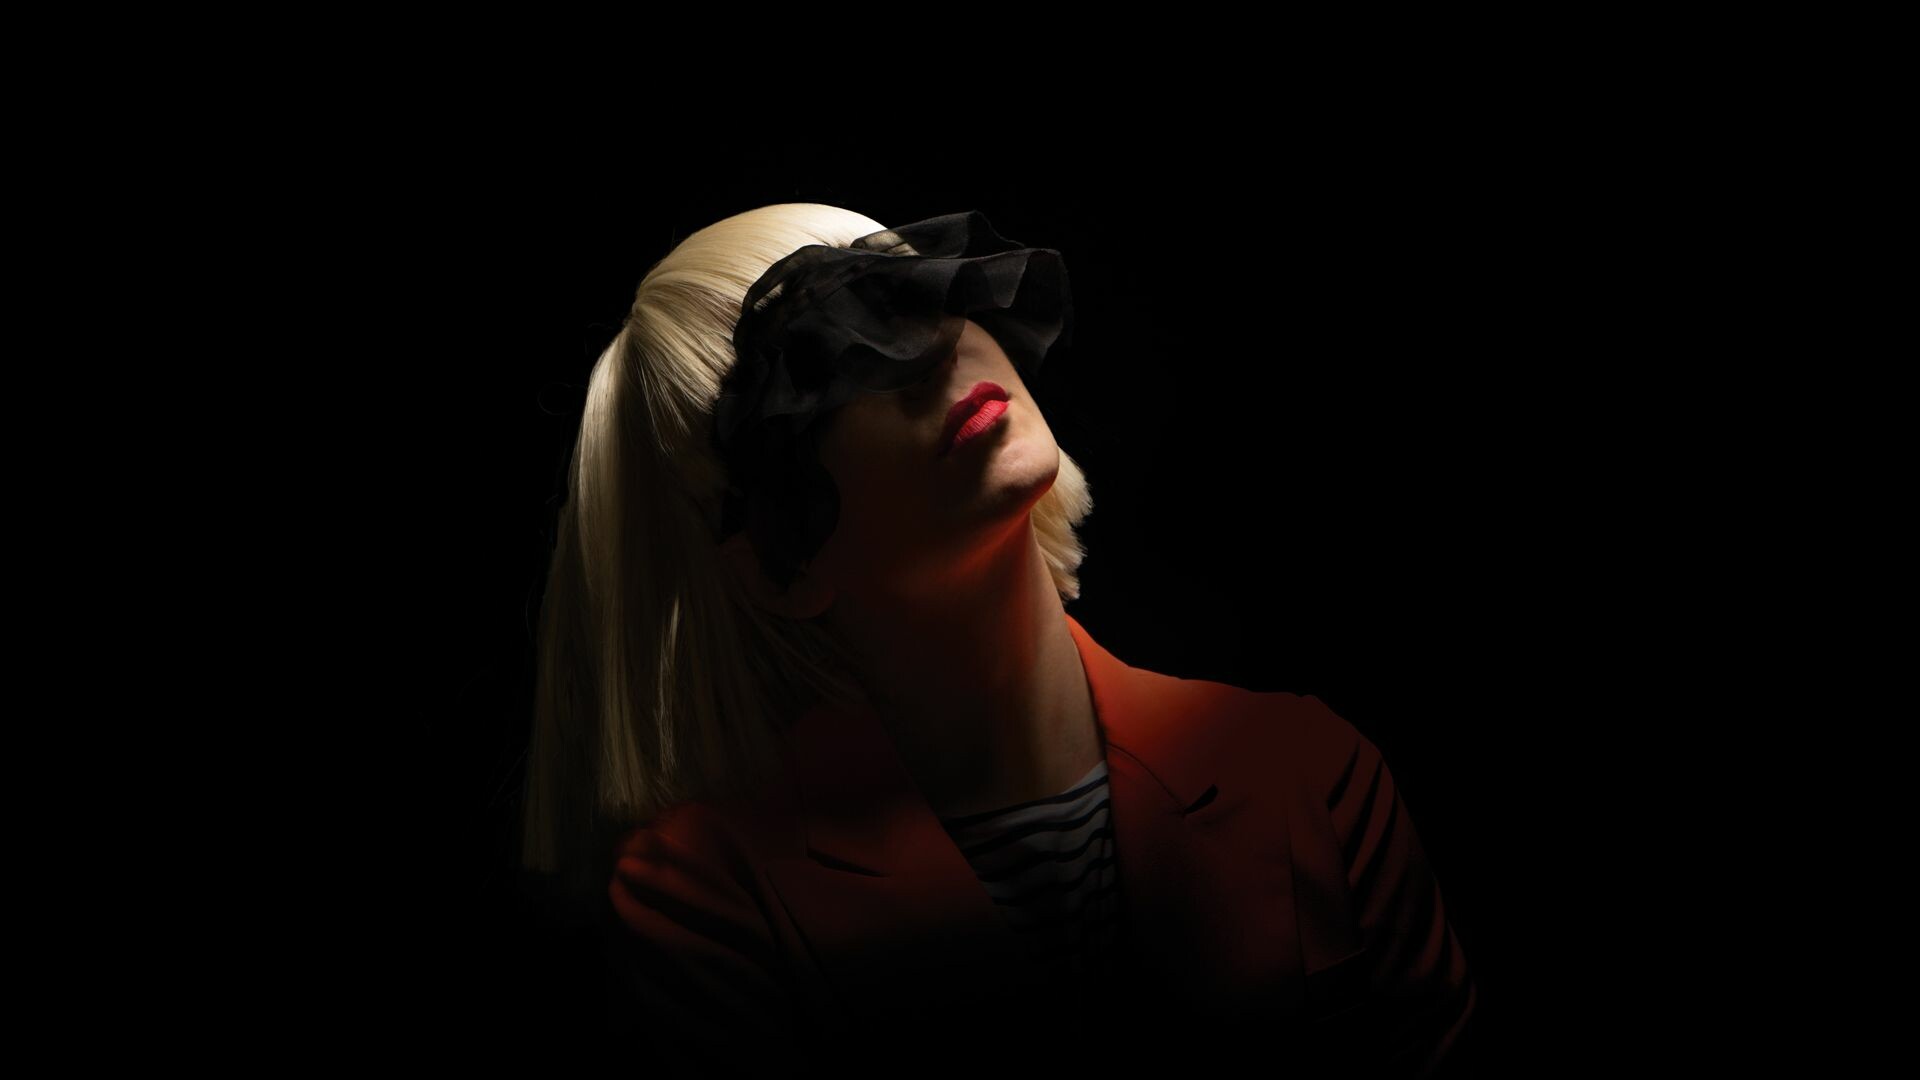 Sia: "Breathe Me" charted at number 24 on the Rock Digital Songs chart. 1920x1080 Full HD Background.